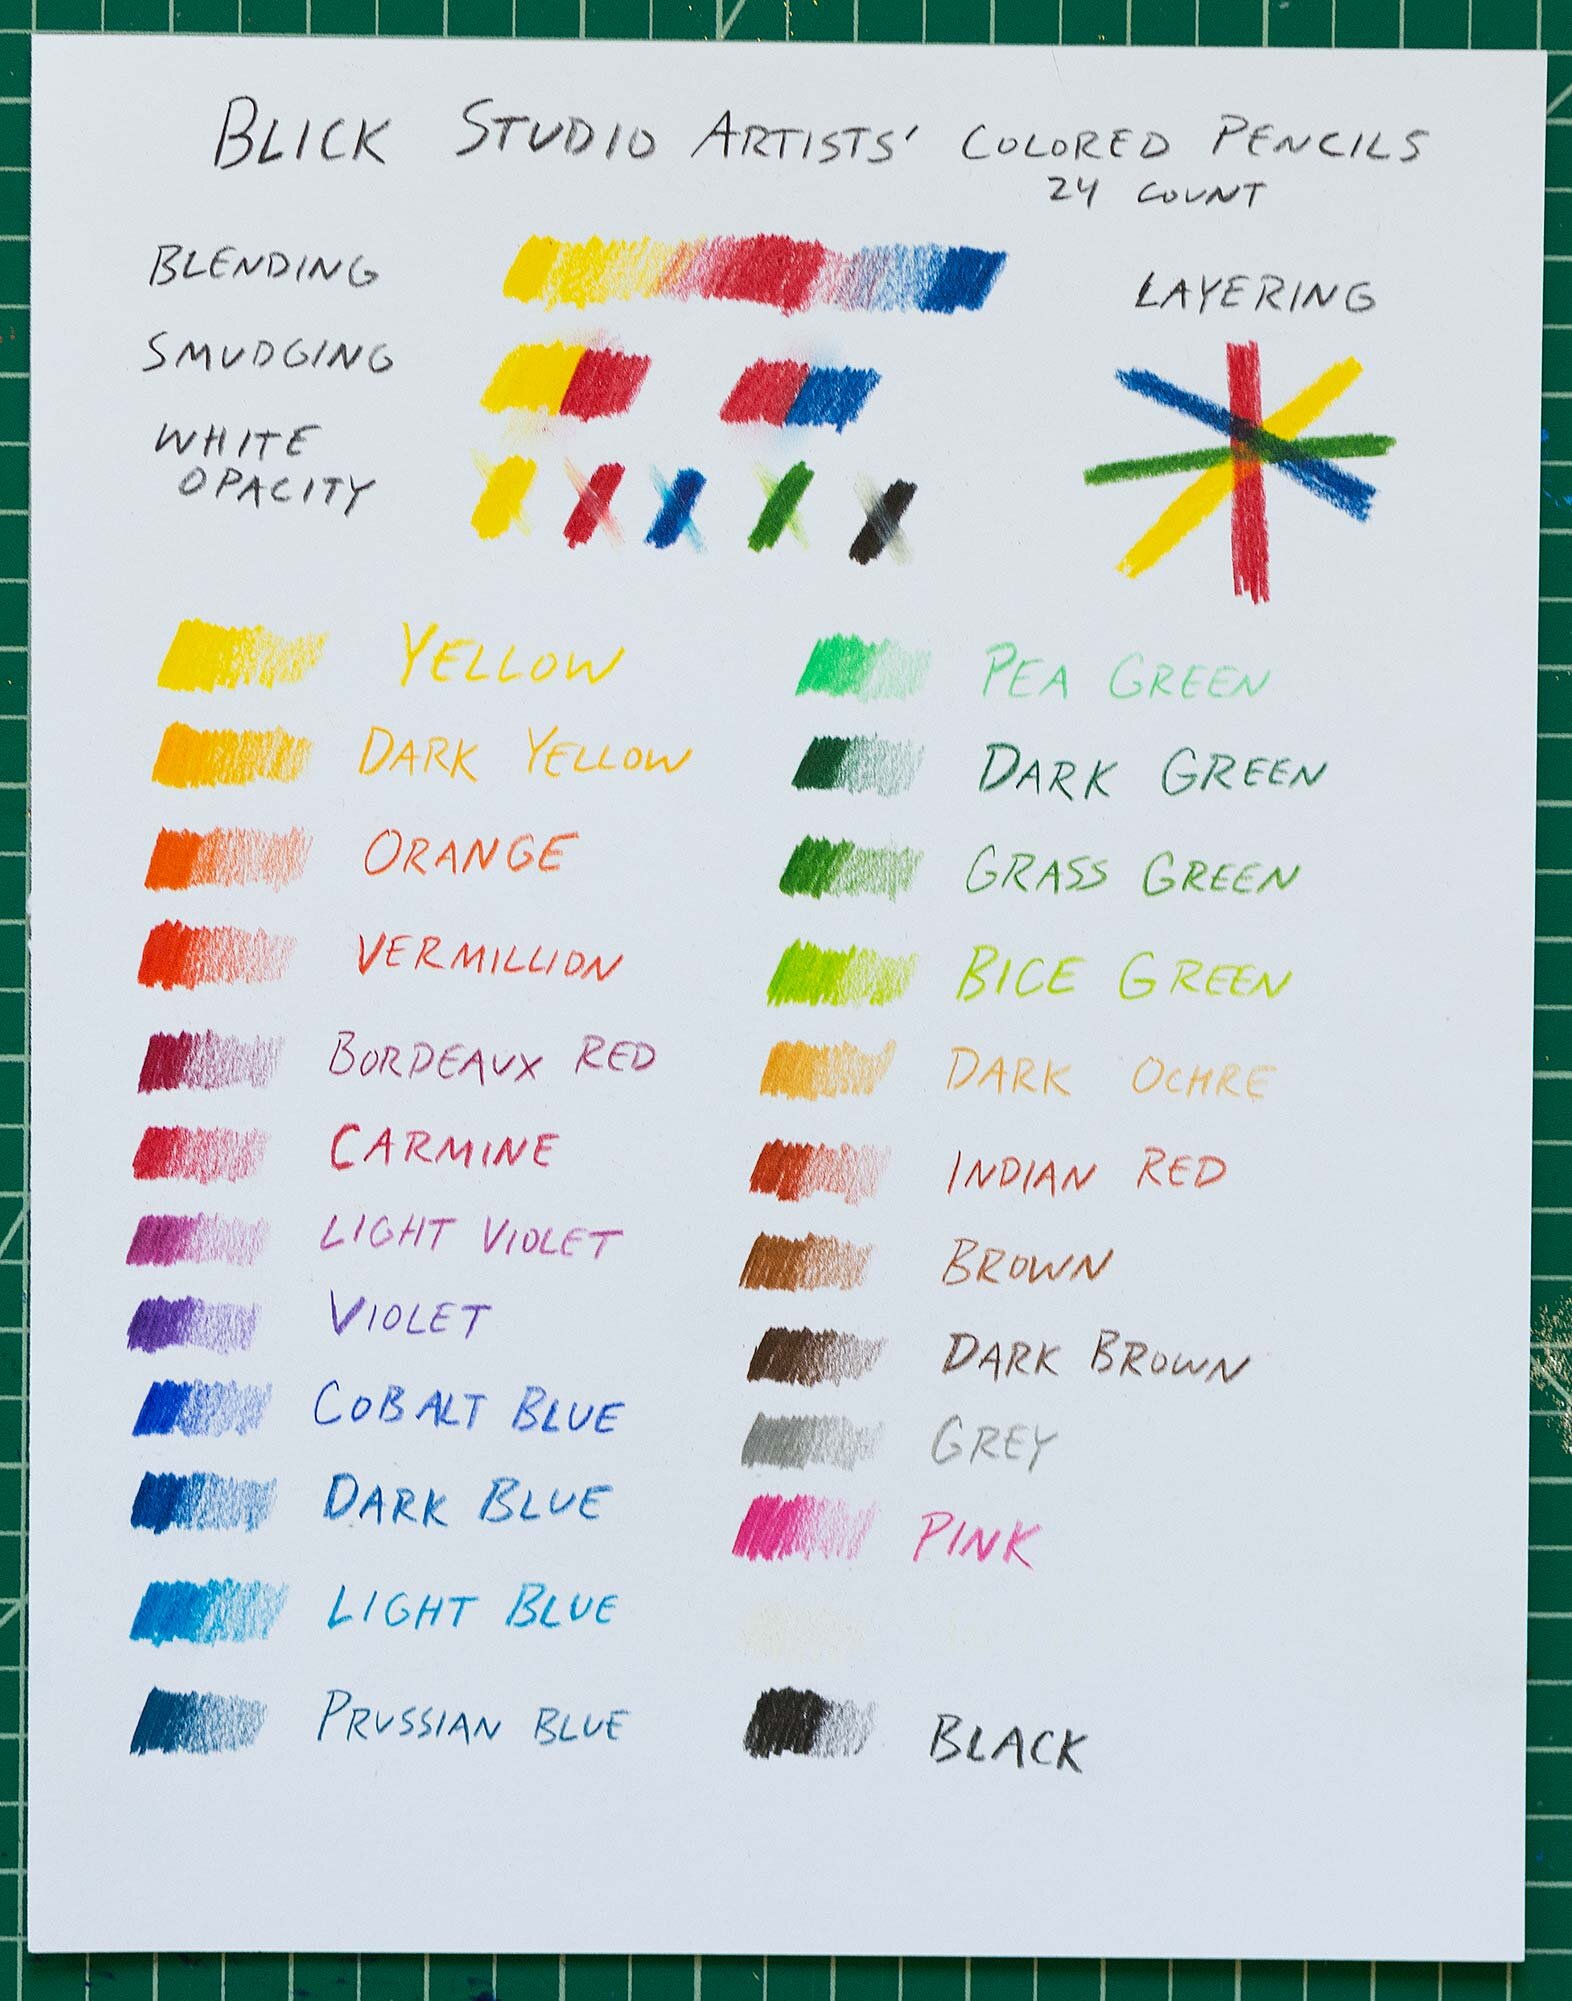 The Ultimate Colored Pencil Comparison: Testing all the Best